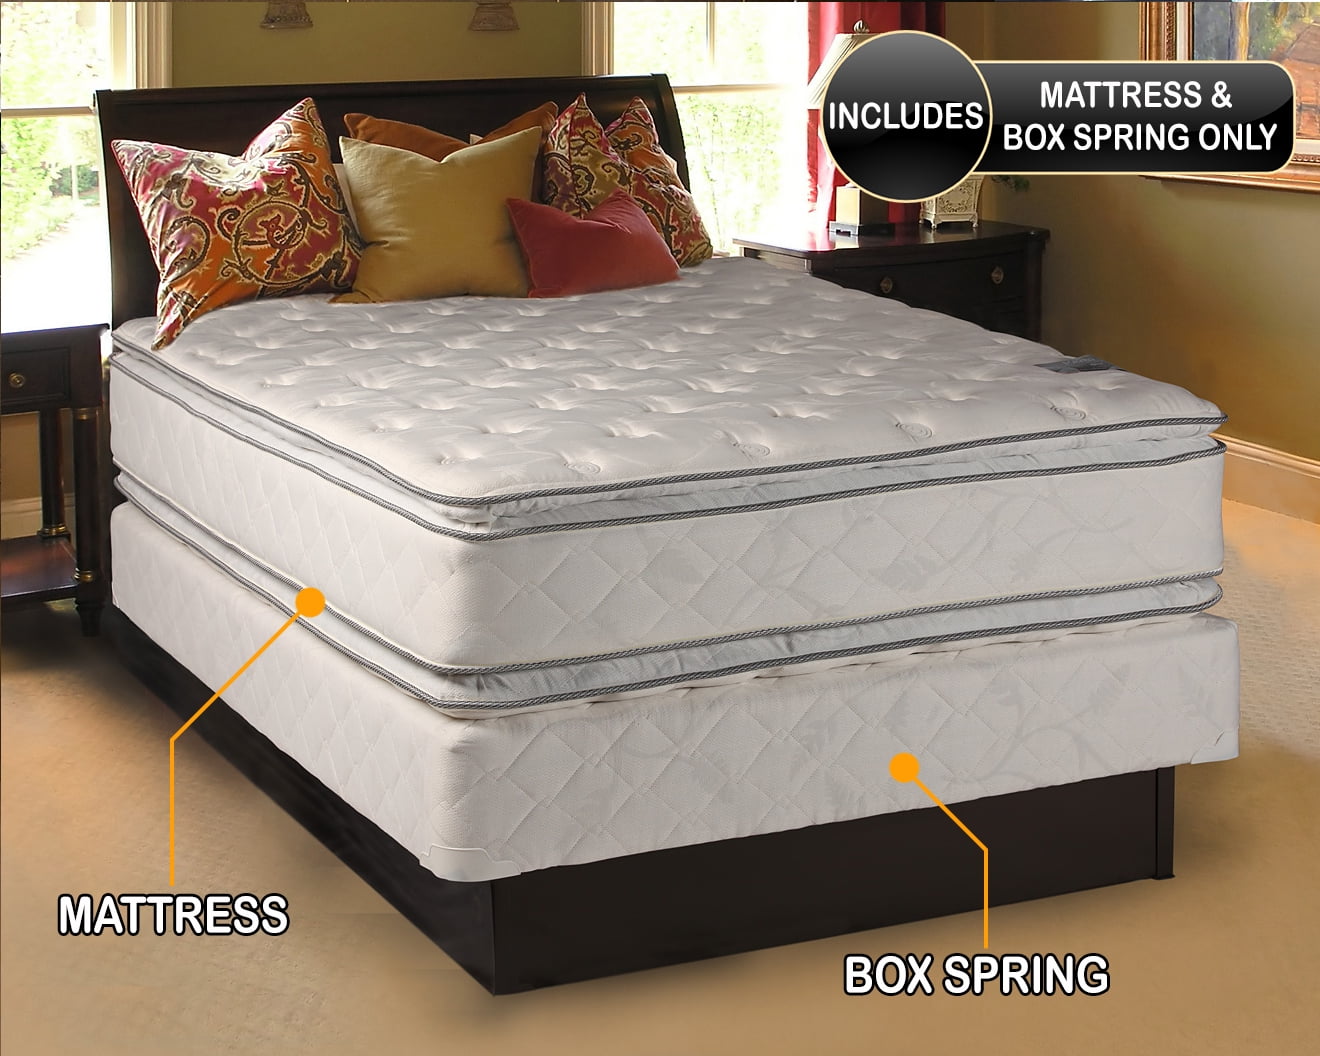 twin sealy posterpedic mattress and box spring cost